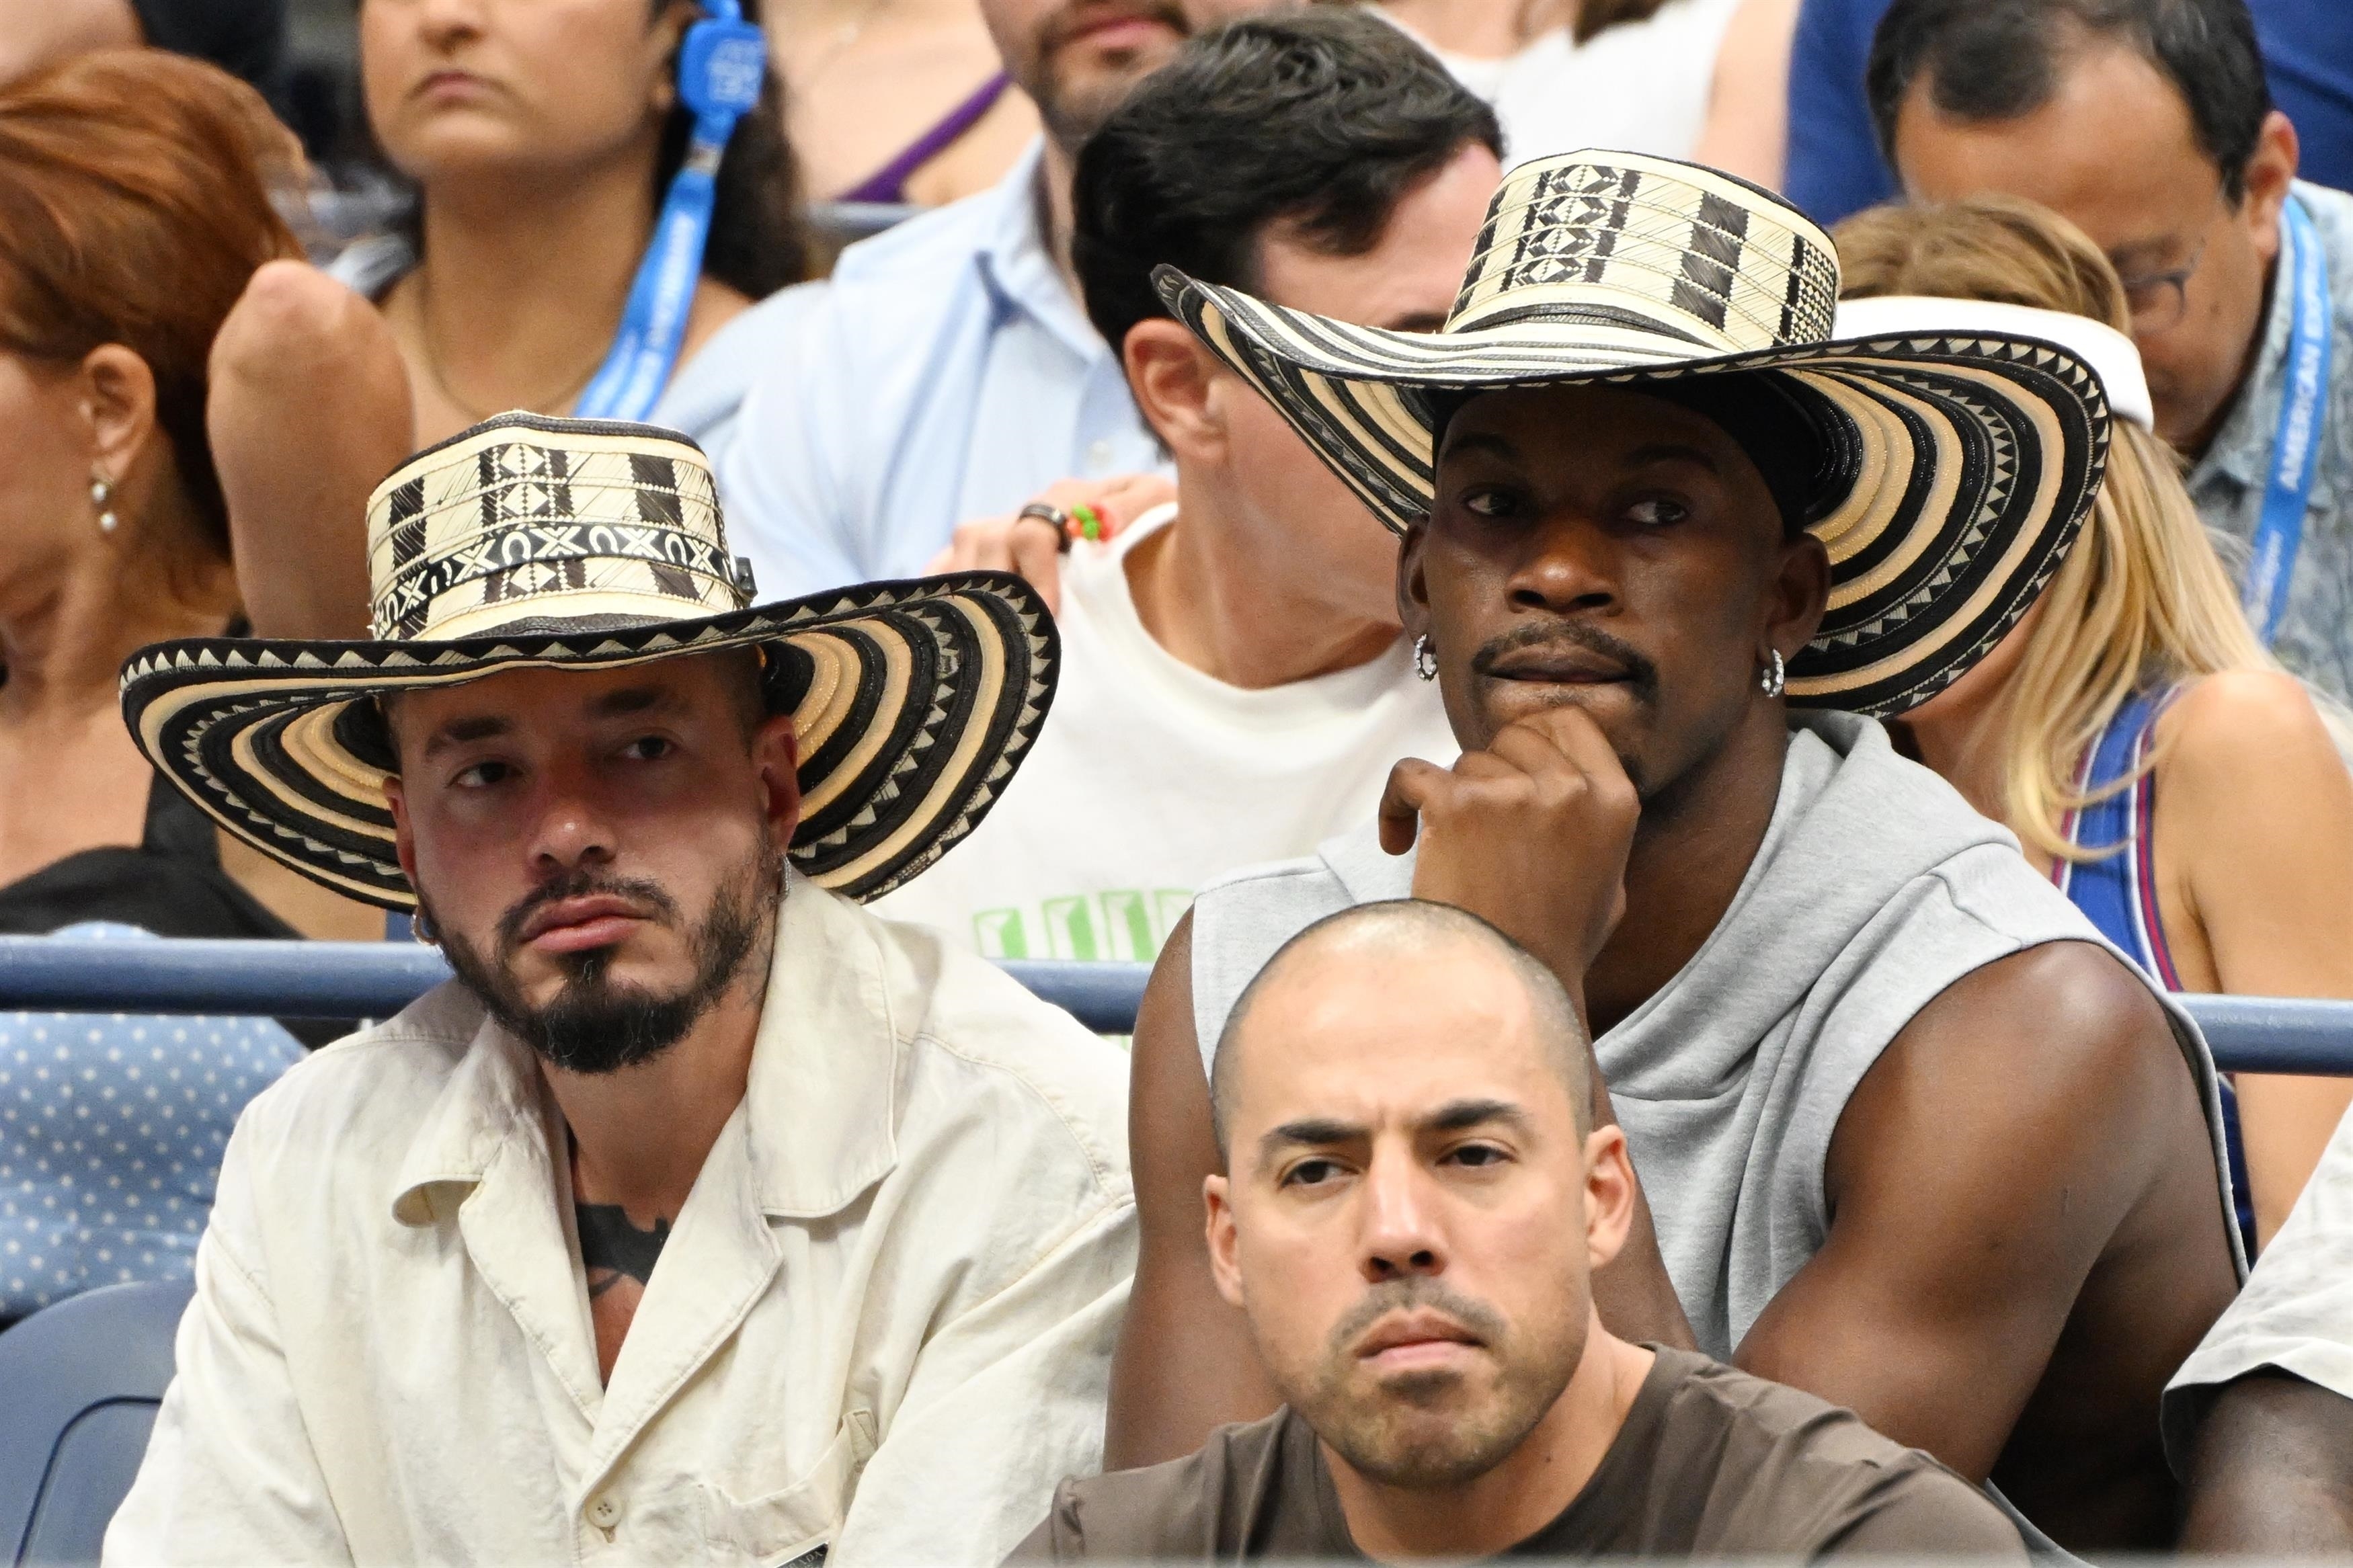 Jimmy Butler & J Balvin sit next to each other at the 2023 US Open wearing matching hats